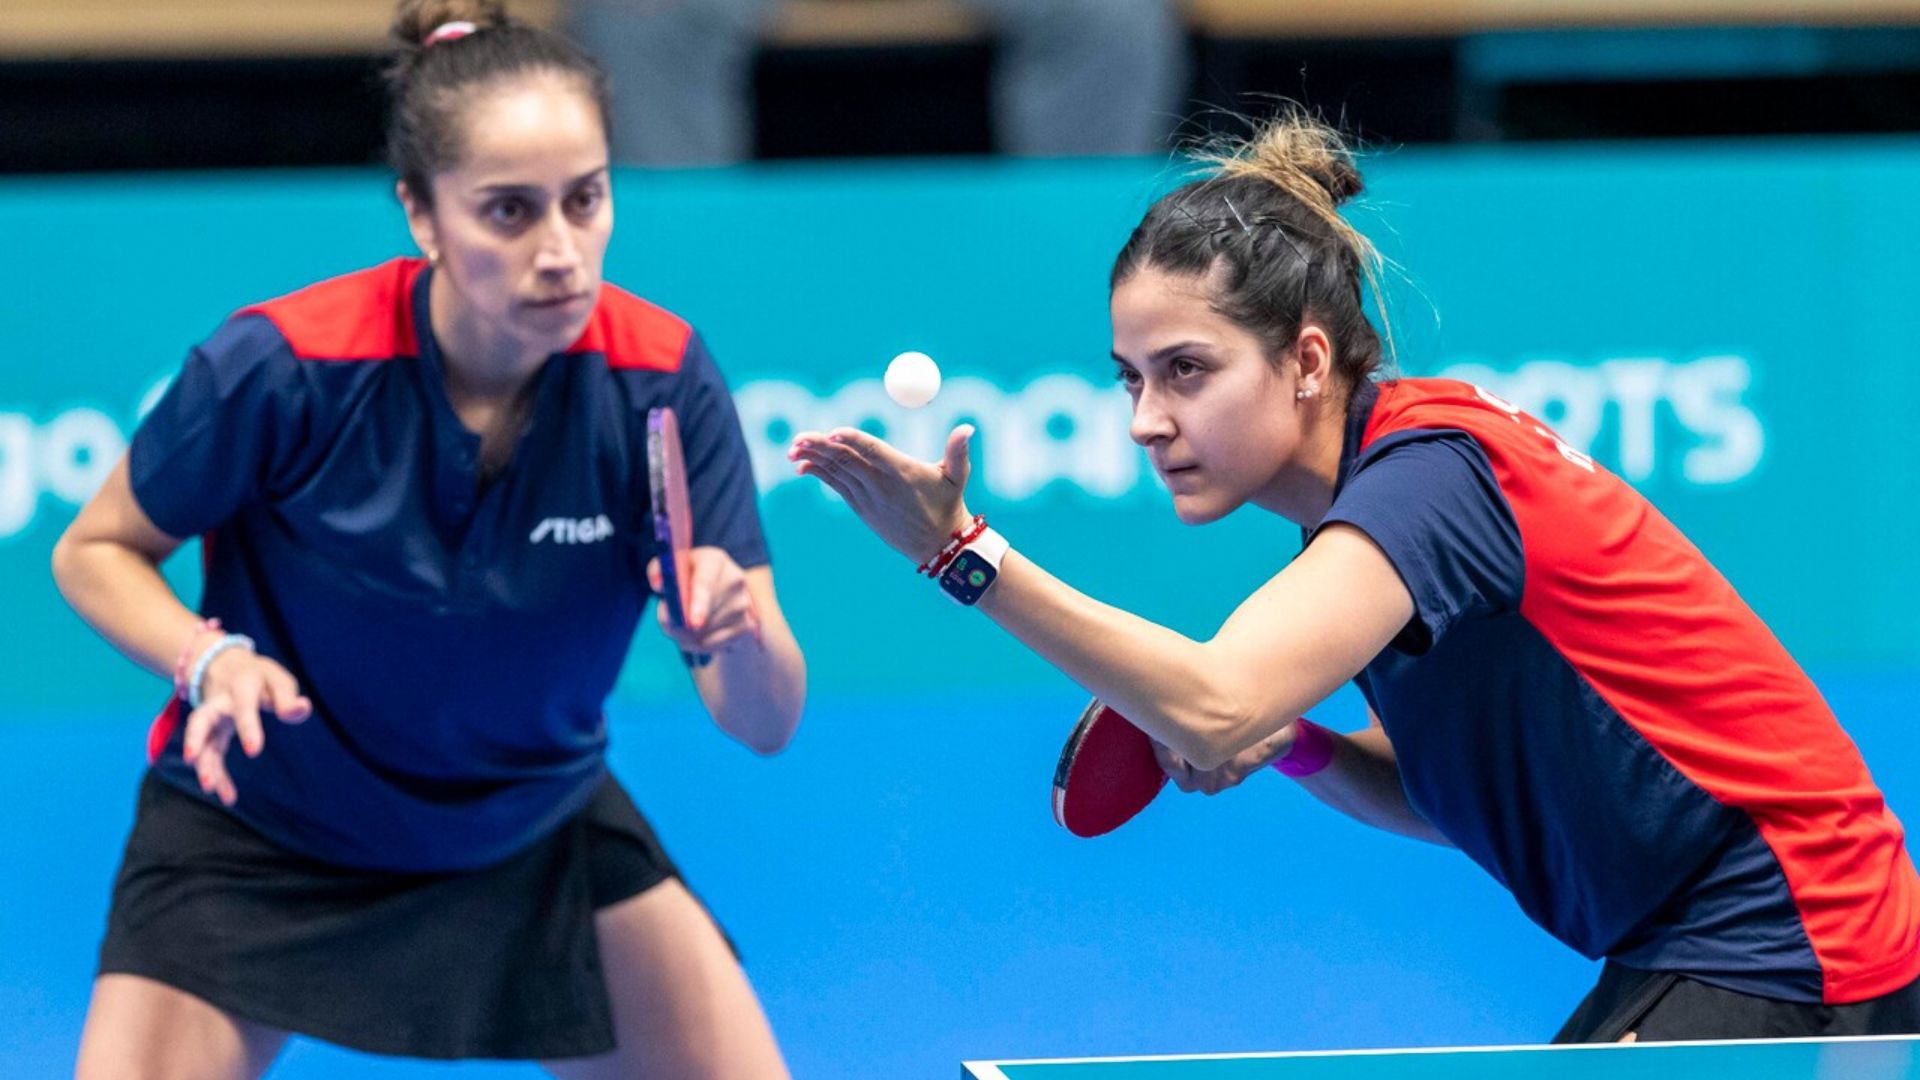 Chile was eliminated from the table tennis final against an American wall